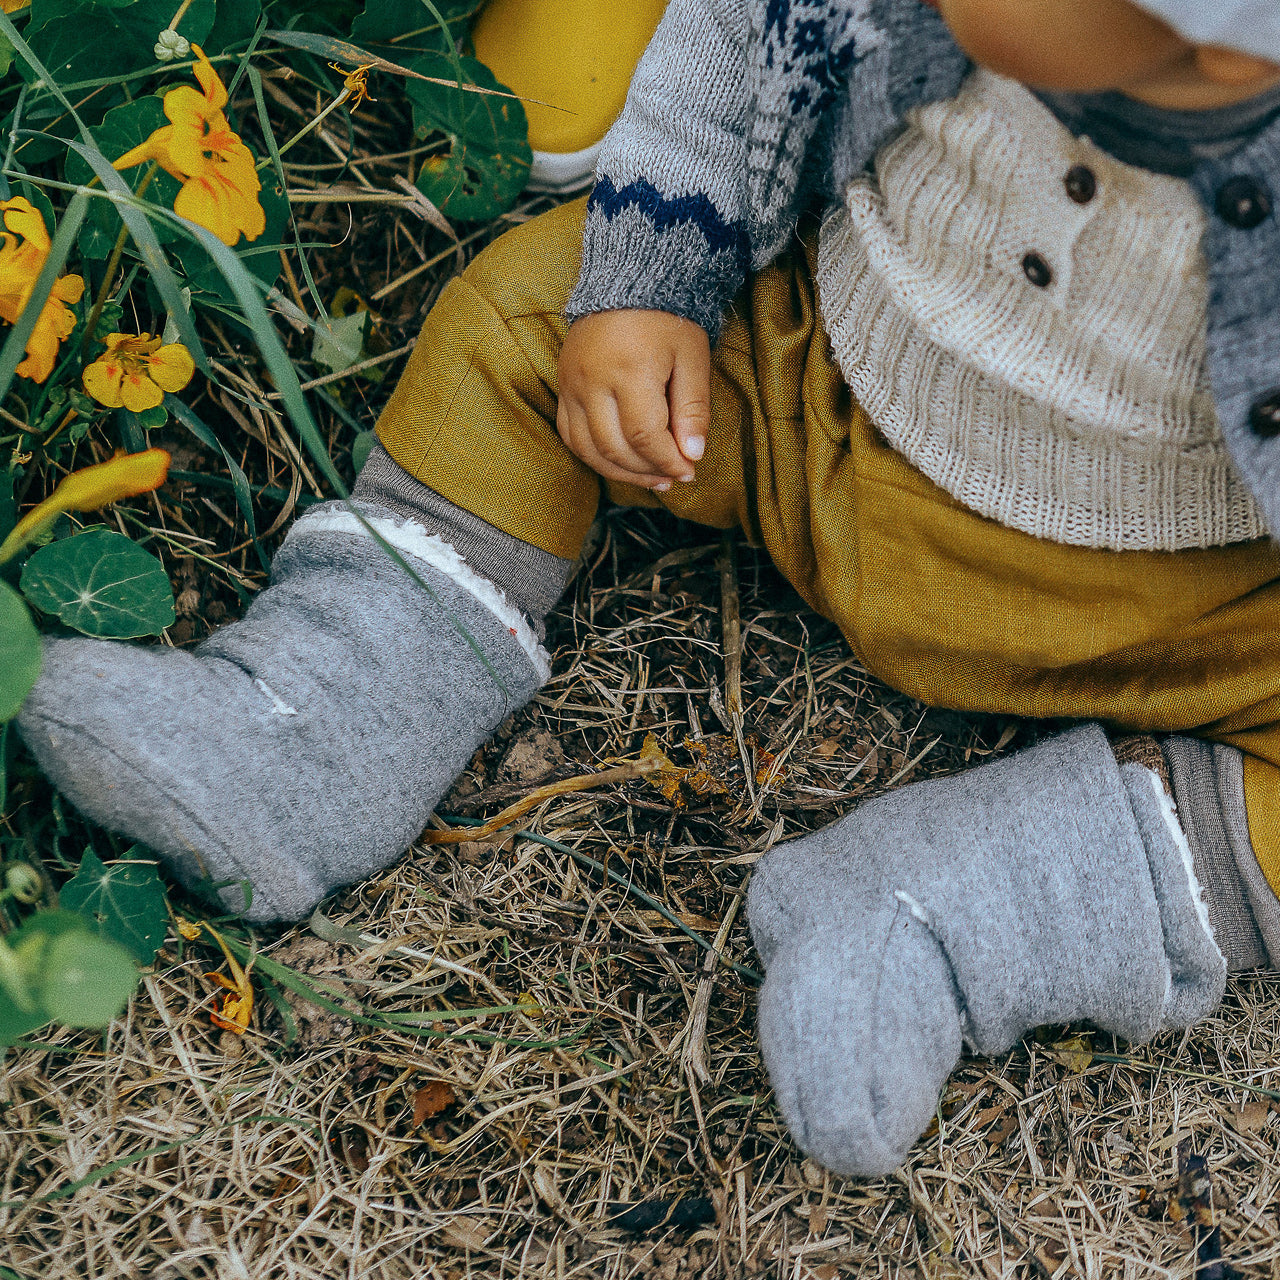 Boiled Wool Booties with Sherpa Organic Cotton Lining (0-2y)